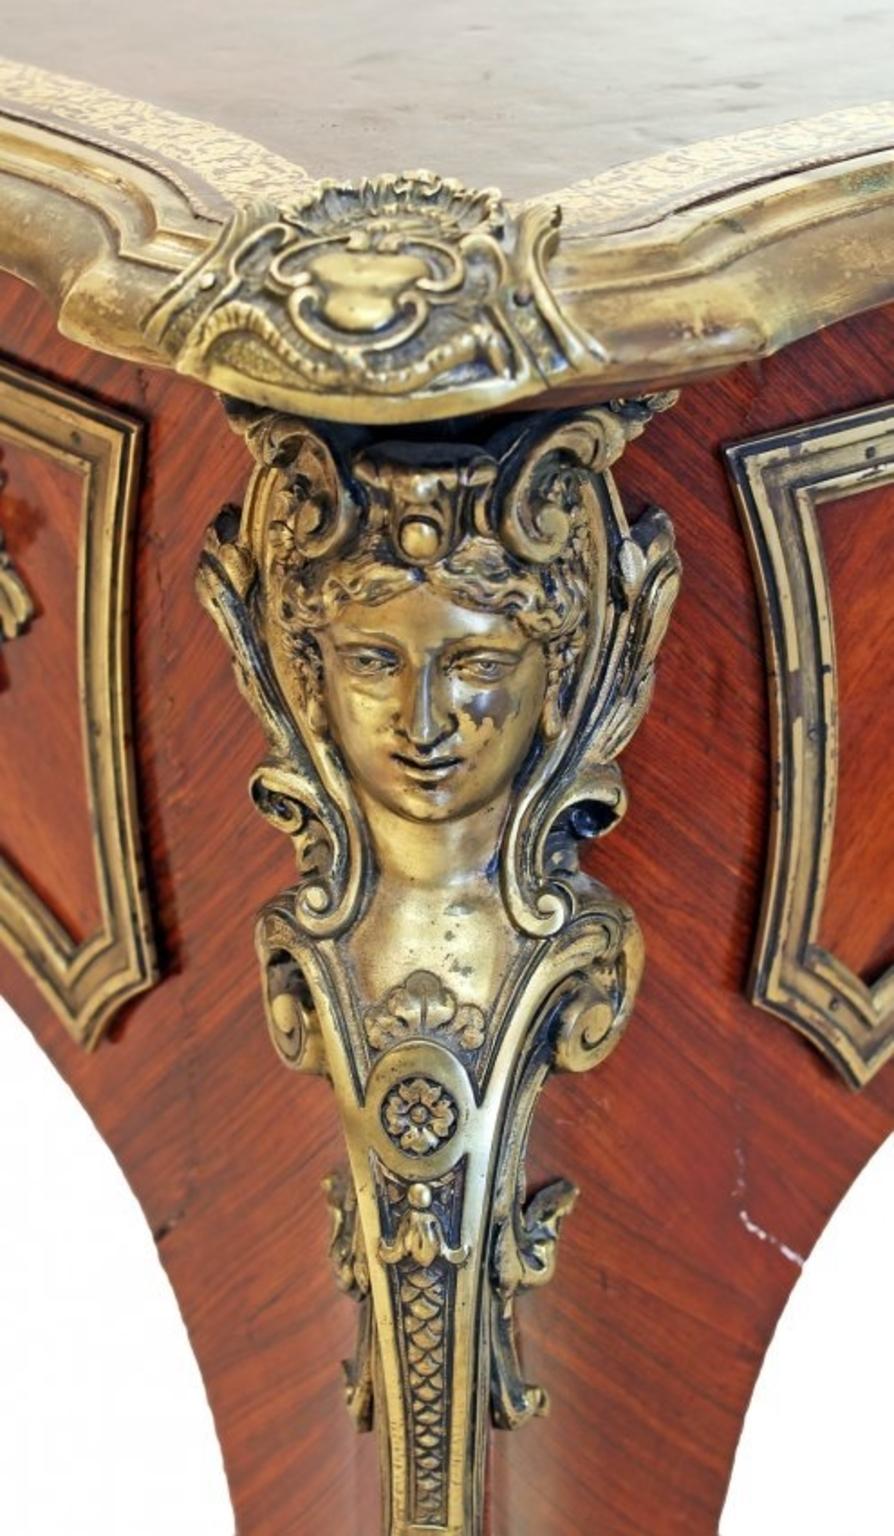 19th Century French Gilt-Bronze Mounted Bureau Plat For Sale